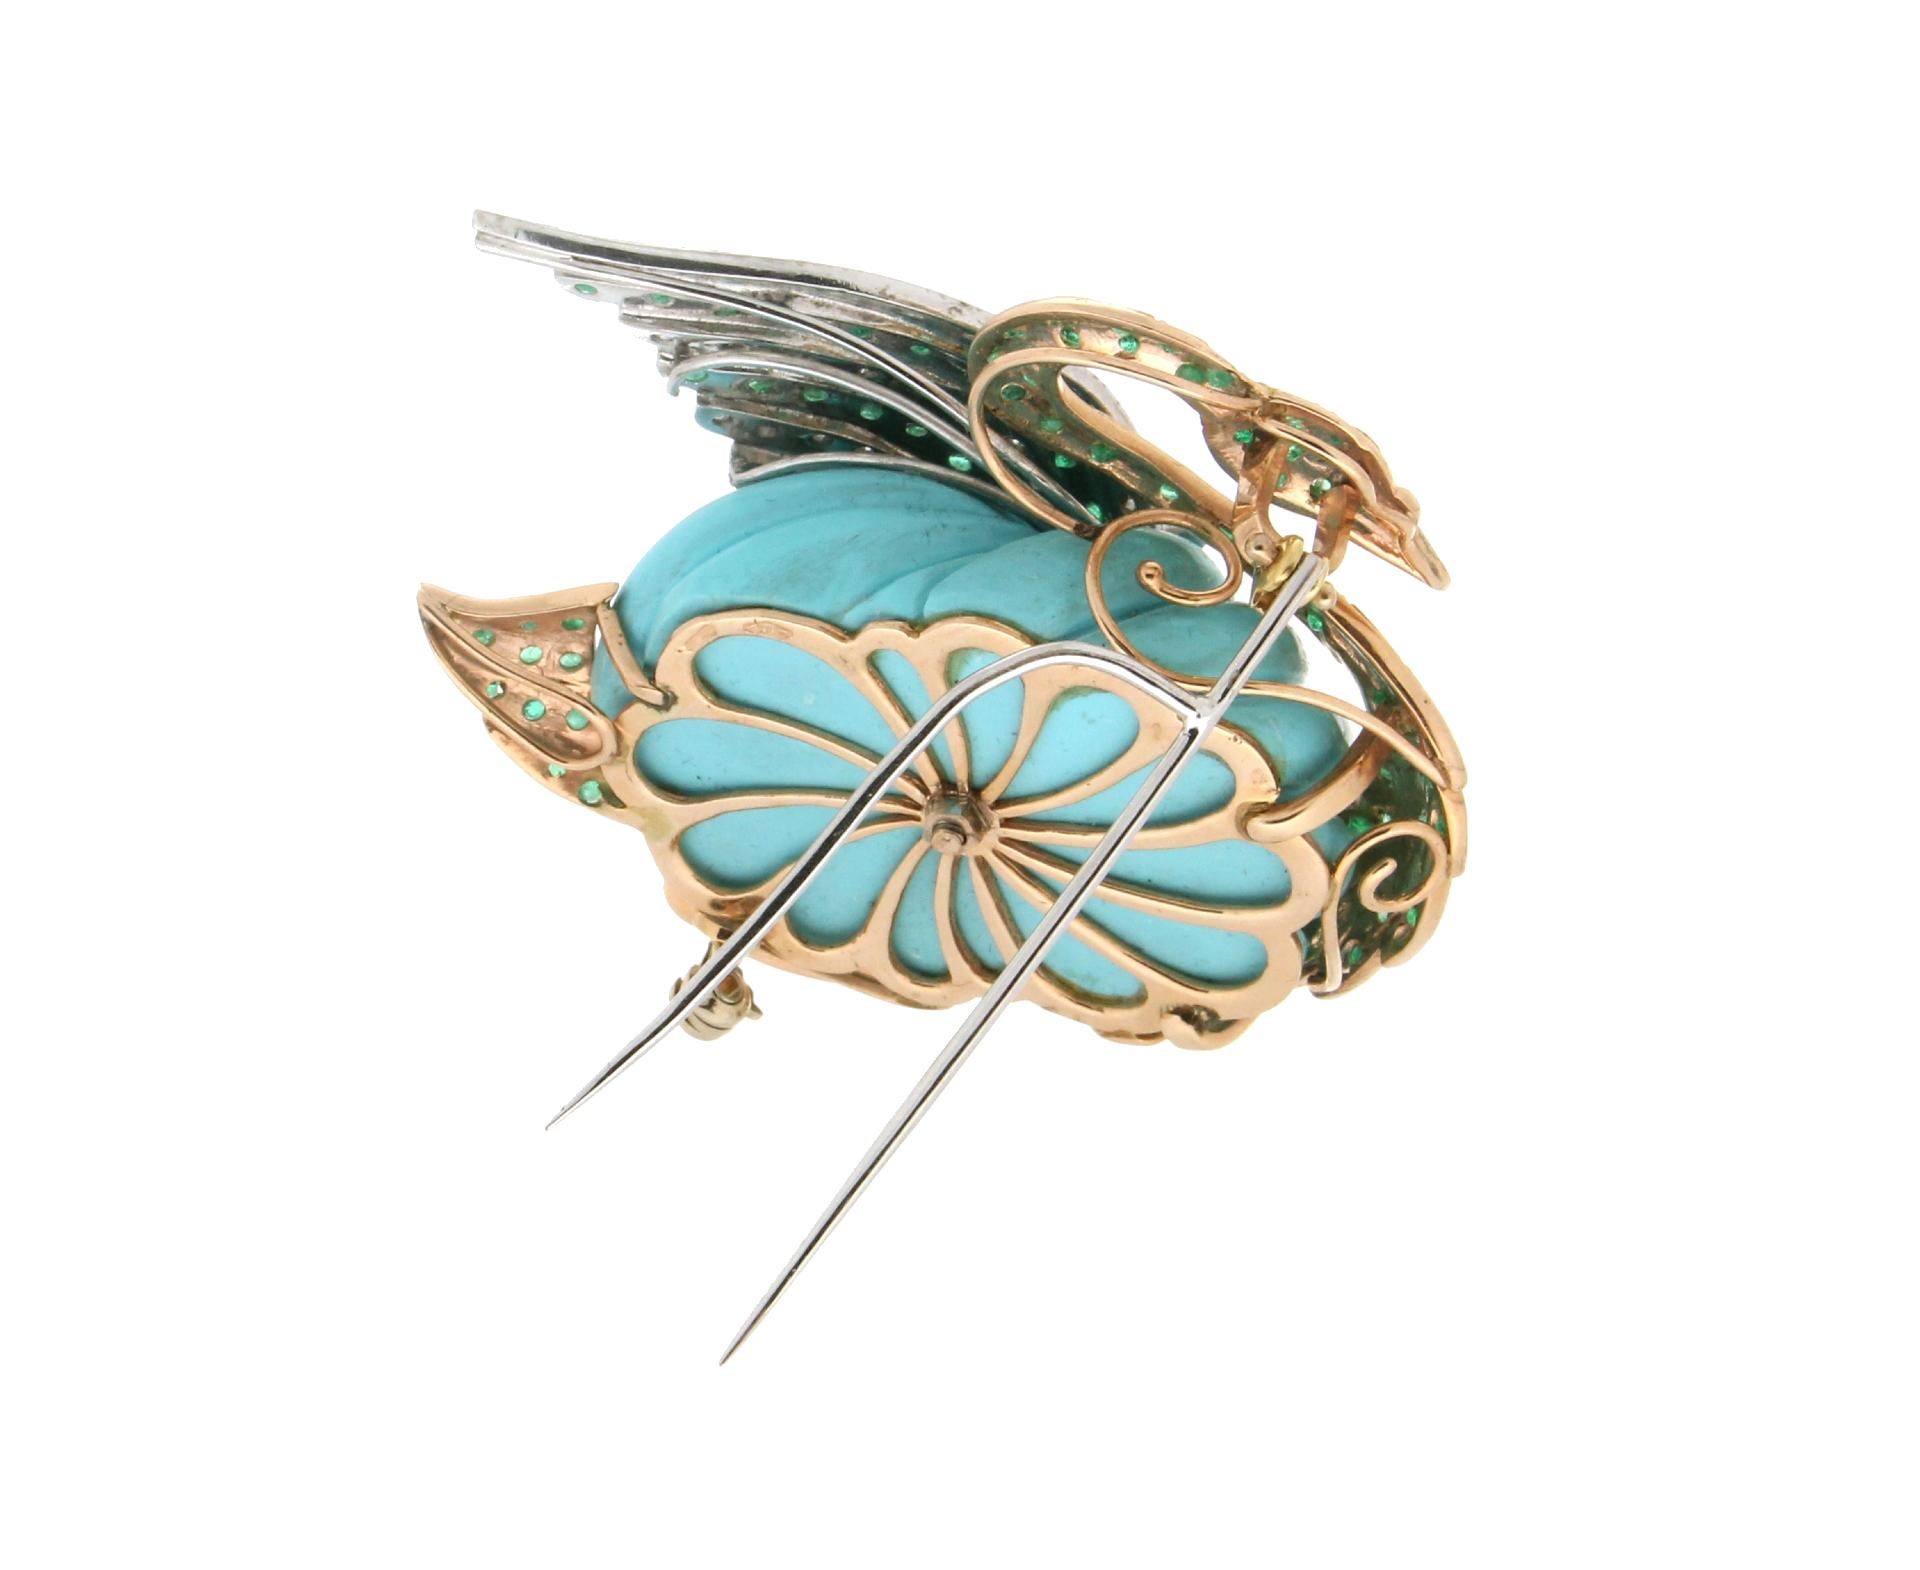 Splendid brooch representing a swan designed and then made entirely by hand by our artisans, made of 14 Carat yellow and white gold. A hand-engraved turquoise paste stone was used for the body, while the wings and the remaining parts of the body are